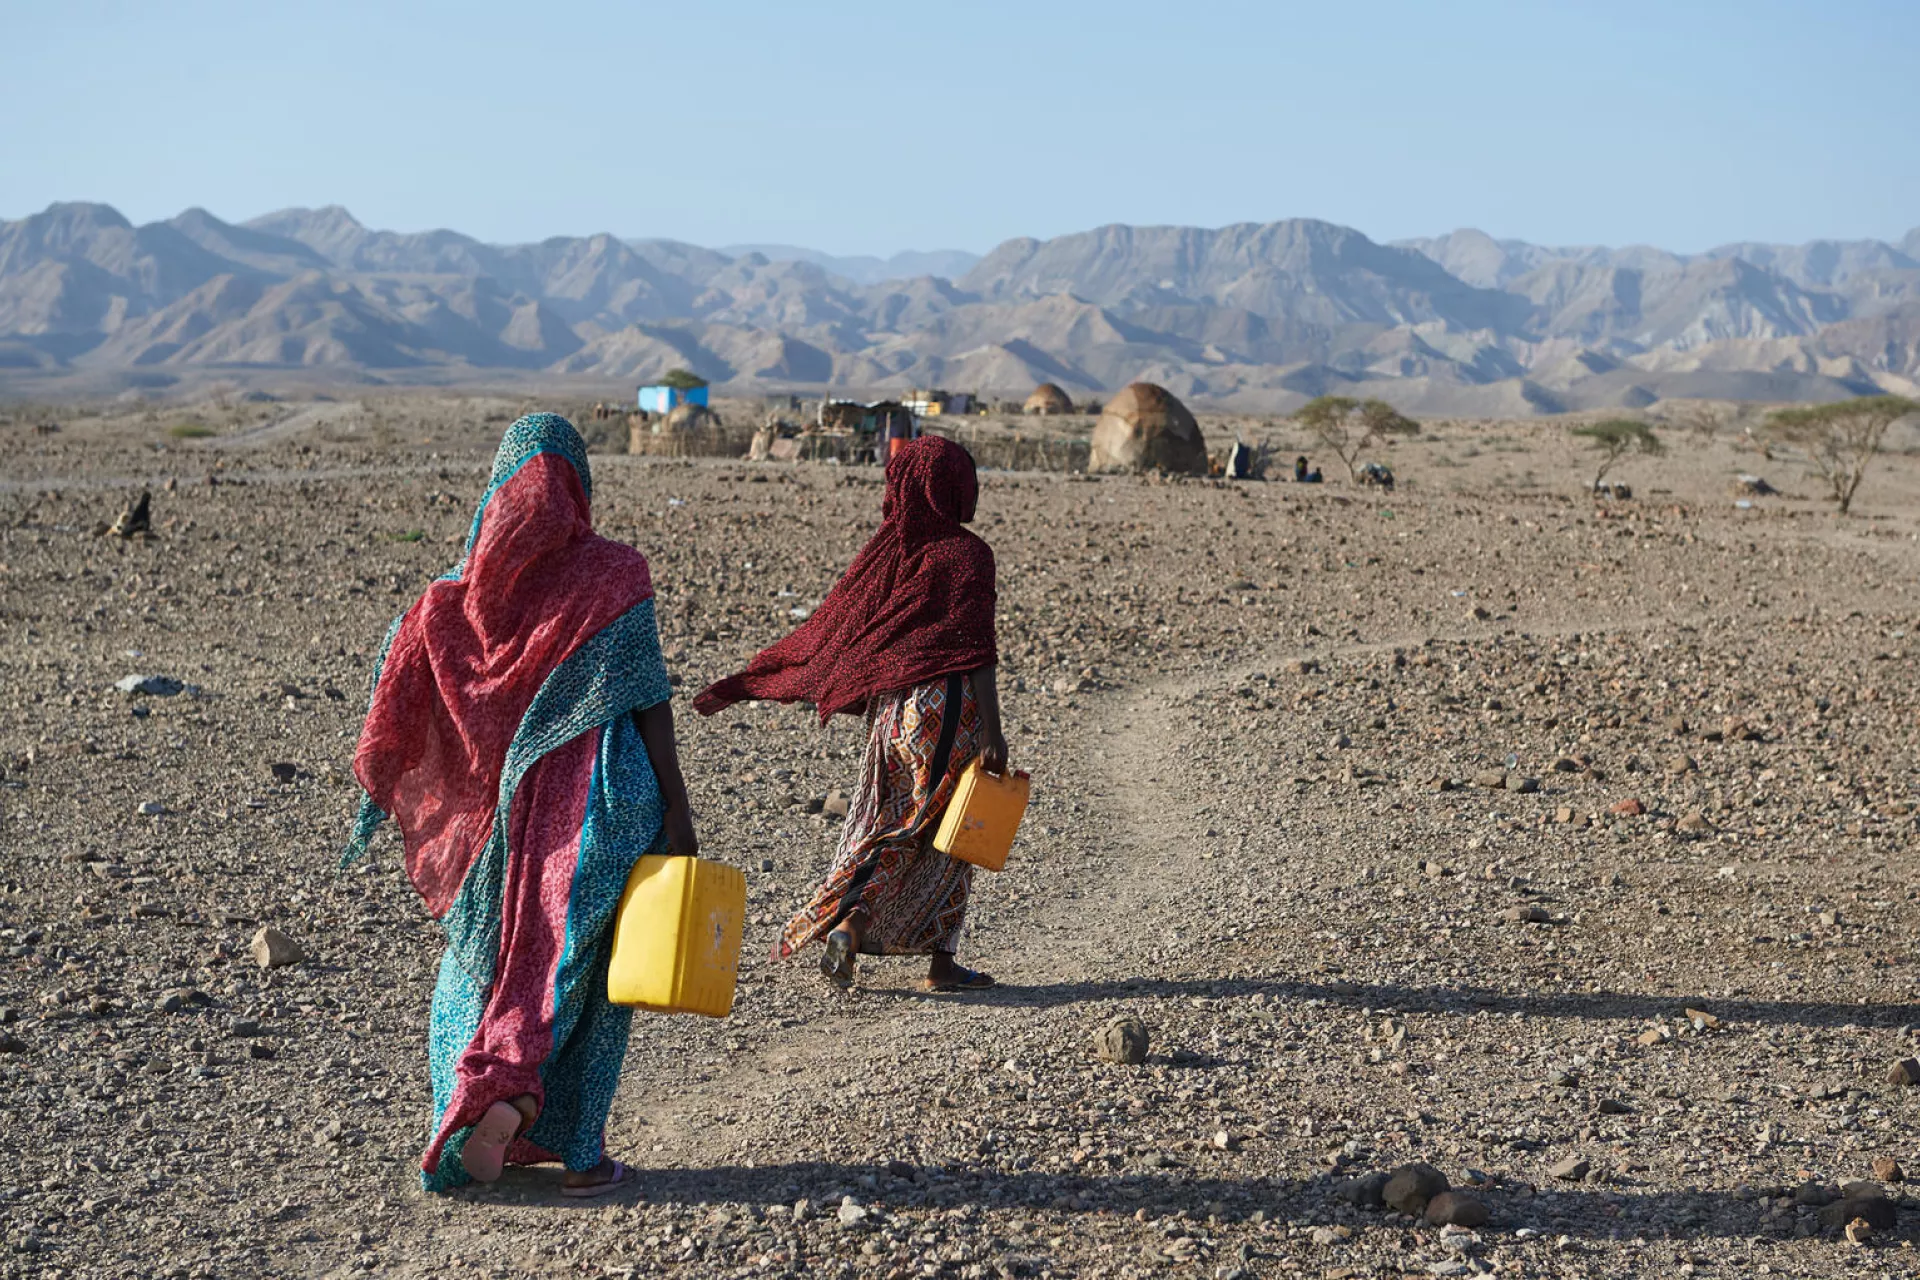 In Djibouti, water is as precious as it is scarce. Since the drought started in 2007, rainfall has dramatically reduced and water levels in traditional wells have dropped forcing women and children to walk long distances for water.